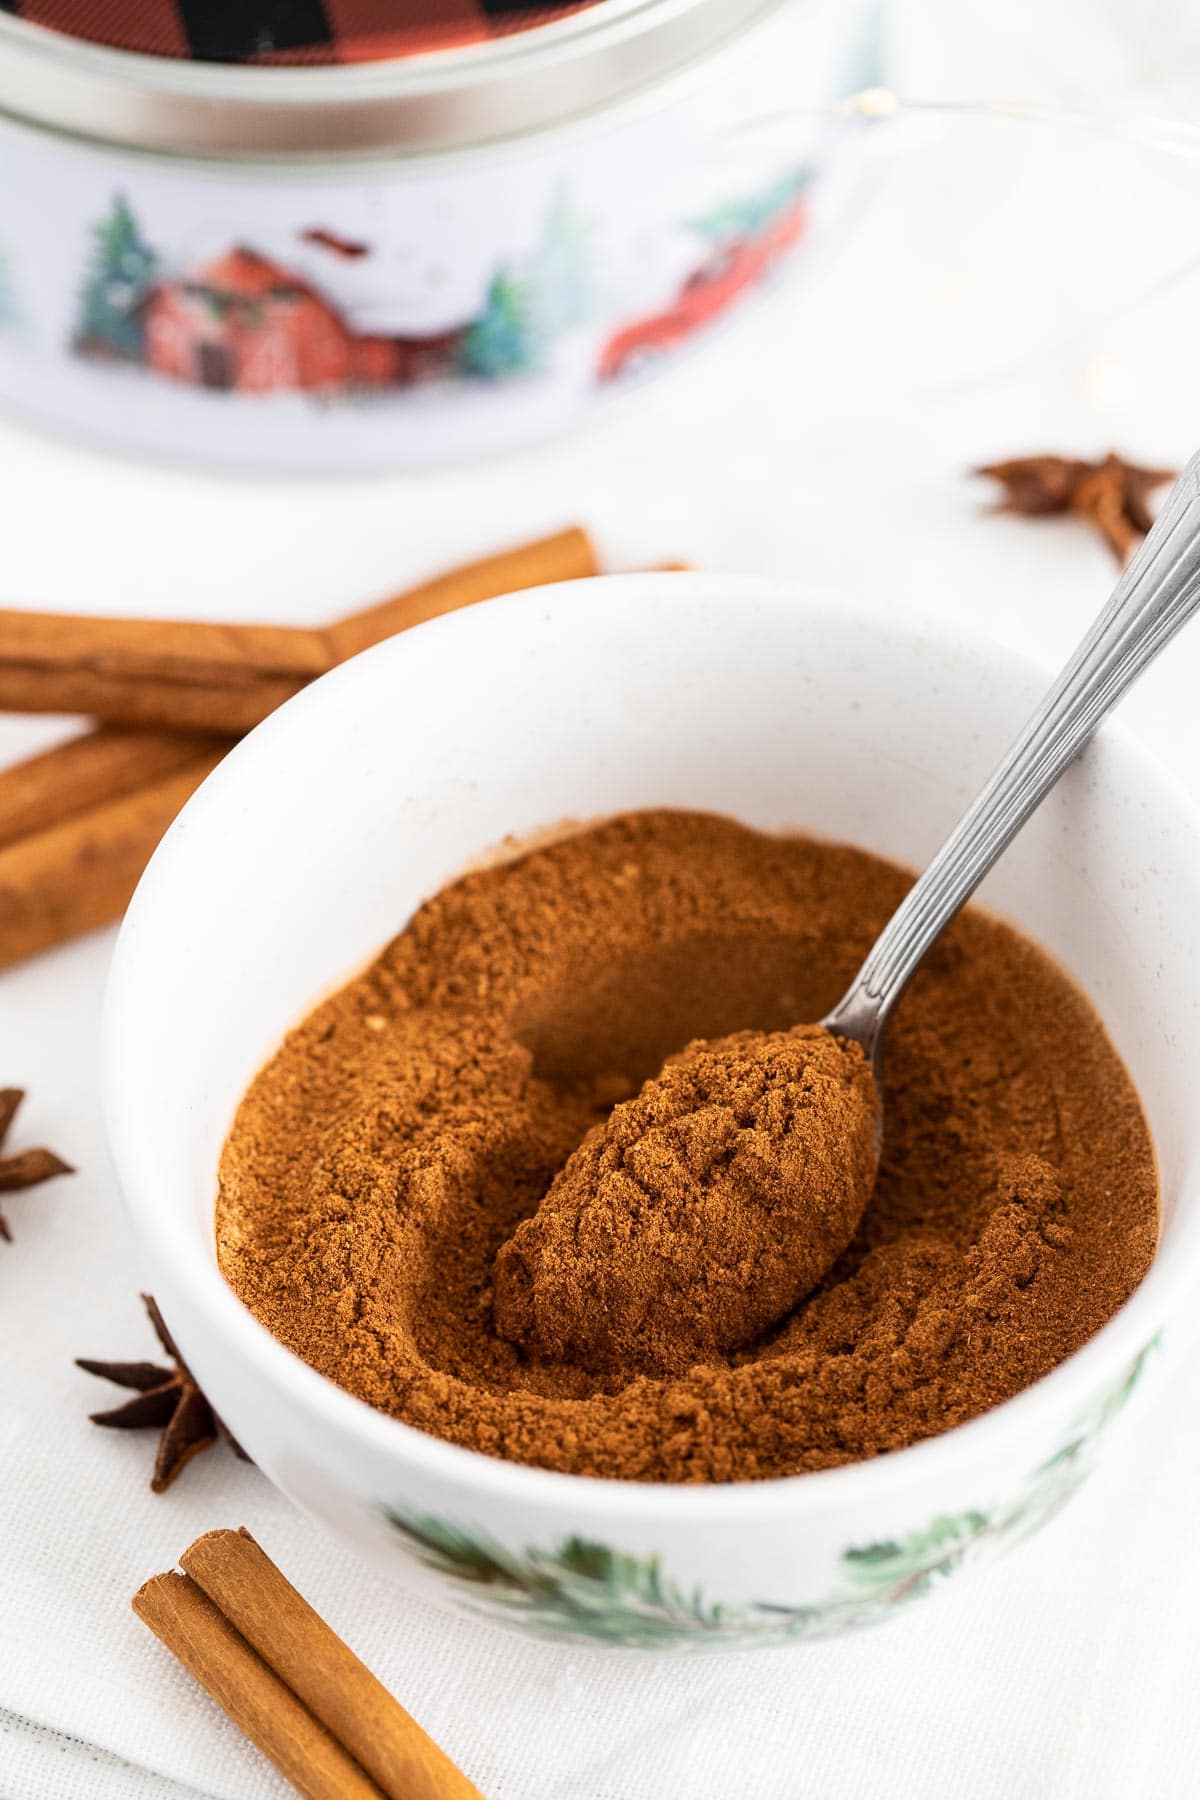 A white bowl filled with ground spices and a spoon in it, next to cinnamon sticks and star anise